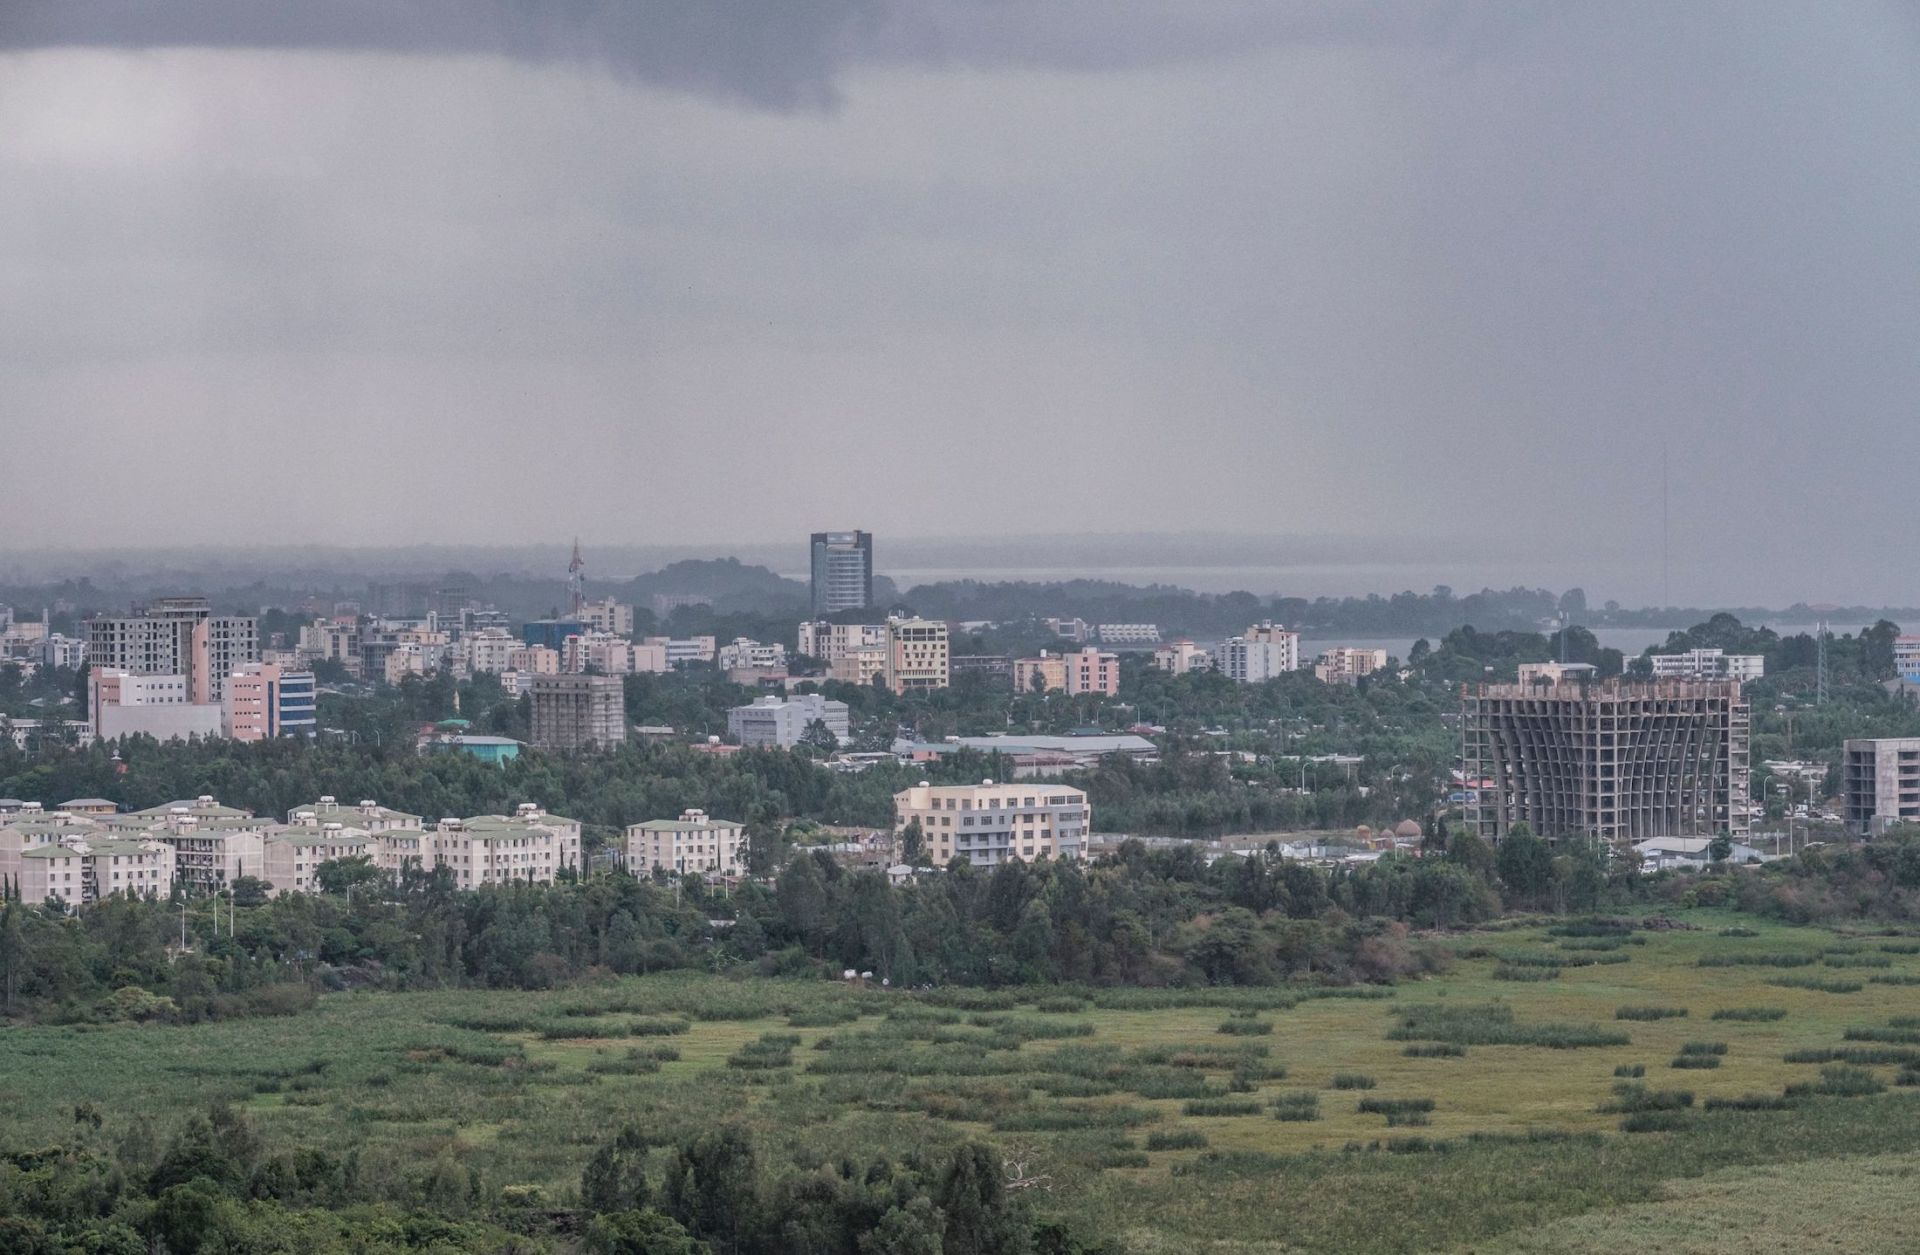 A view of the city of Bahir Dar, the capital of the Amhara region in northern Ethiopia, on June 19, 2021.